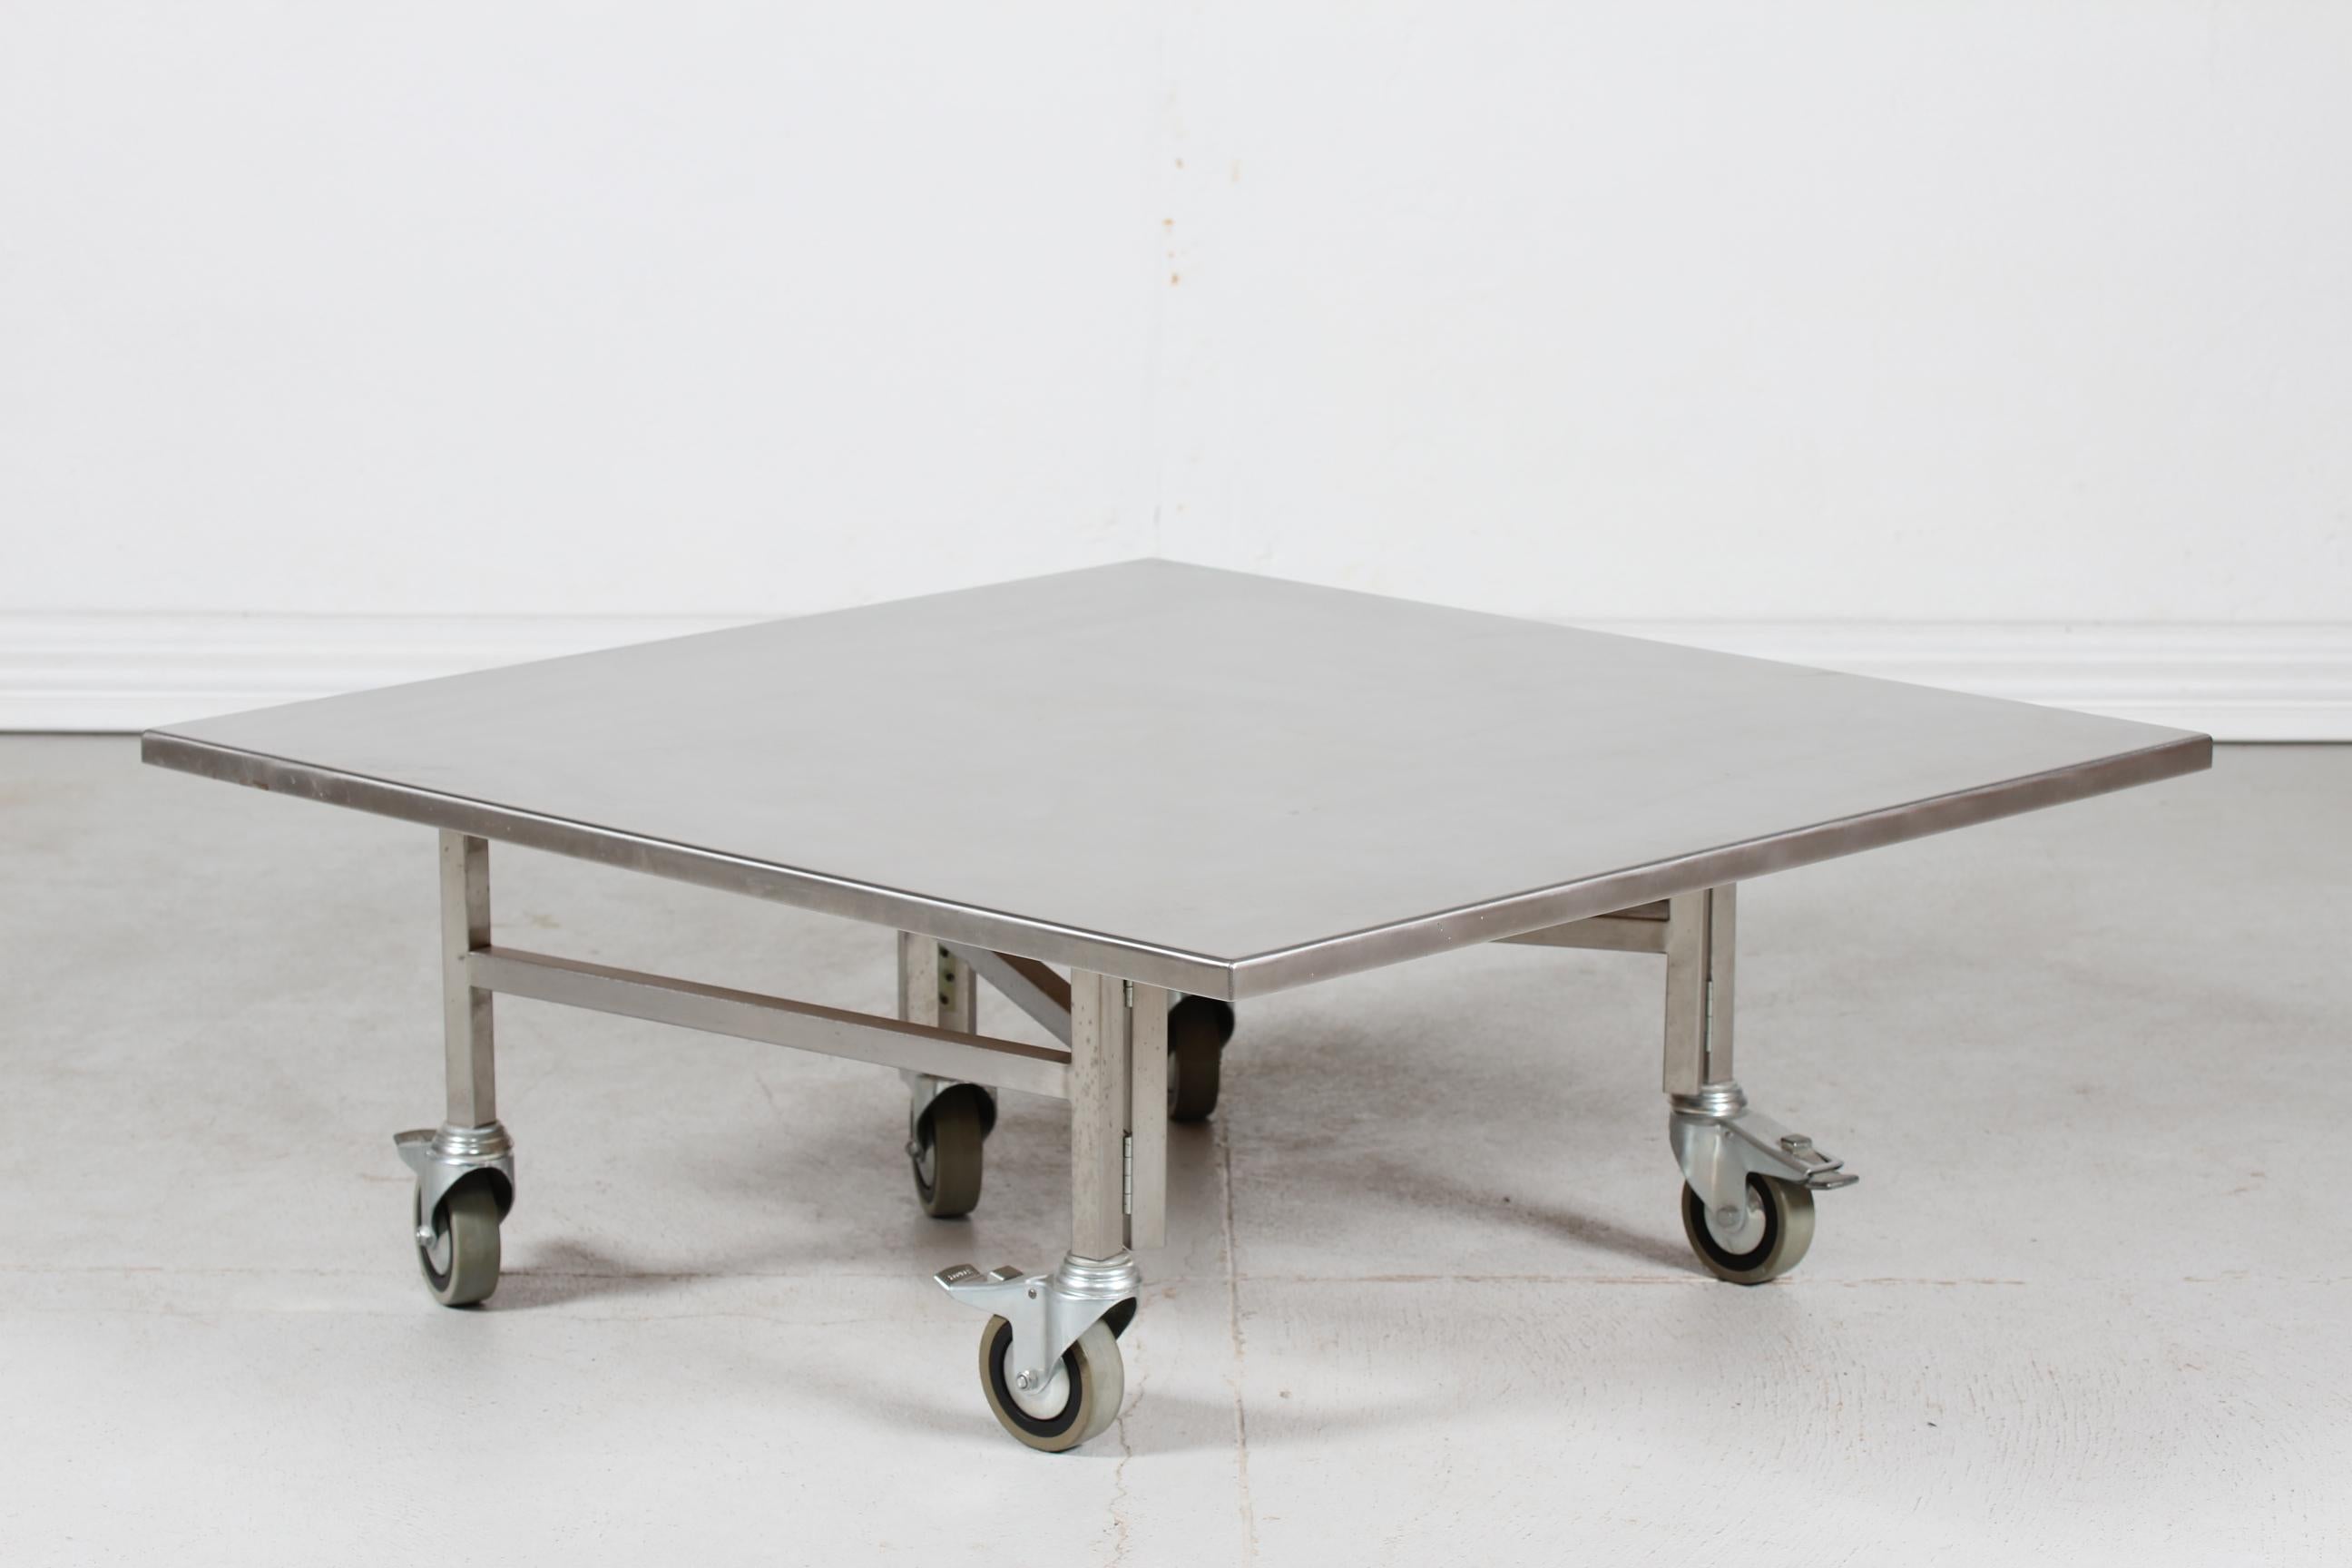 Danish modern custom made low square coffee table on wheels by Danish manufacturer in the 1980´s.
The unique table is made of stainless steel on the top, frame of metal and metal wheels with rubber.

Measurements: 
Length 100 cm
Width 100